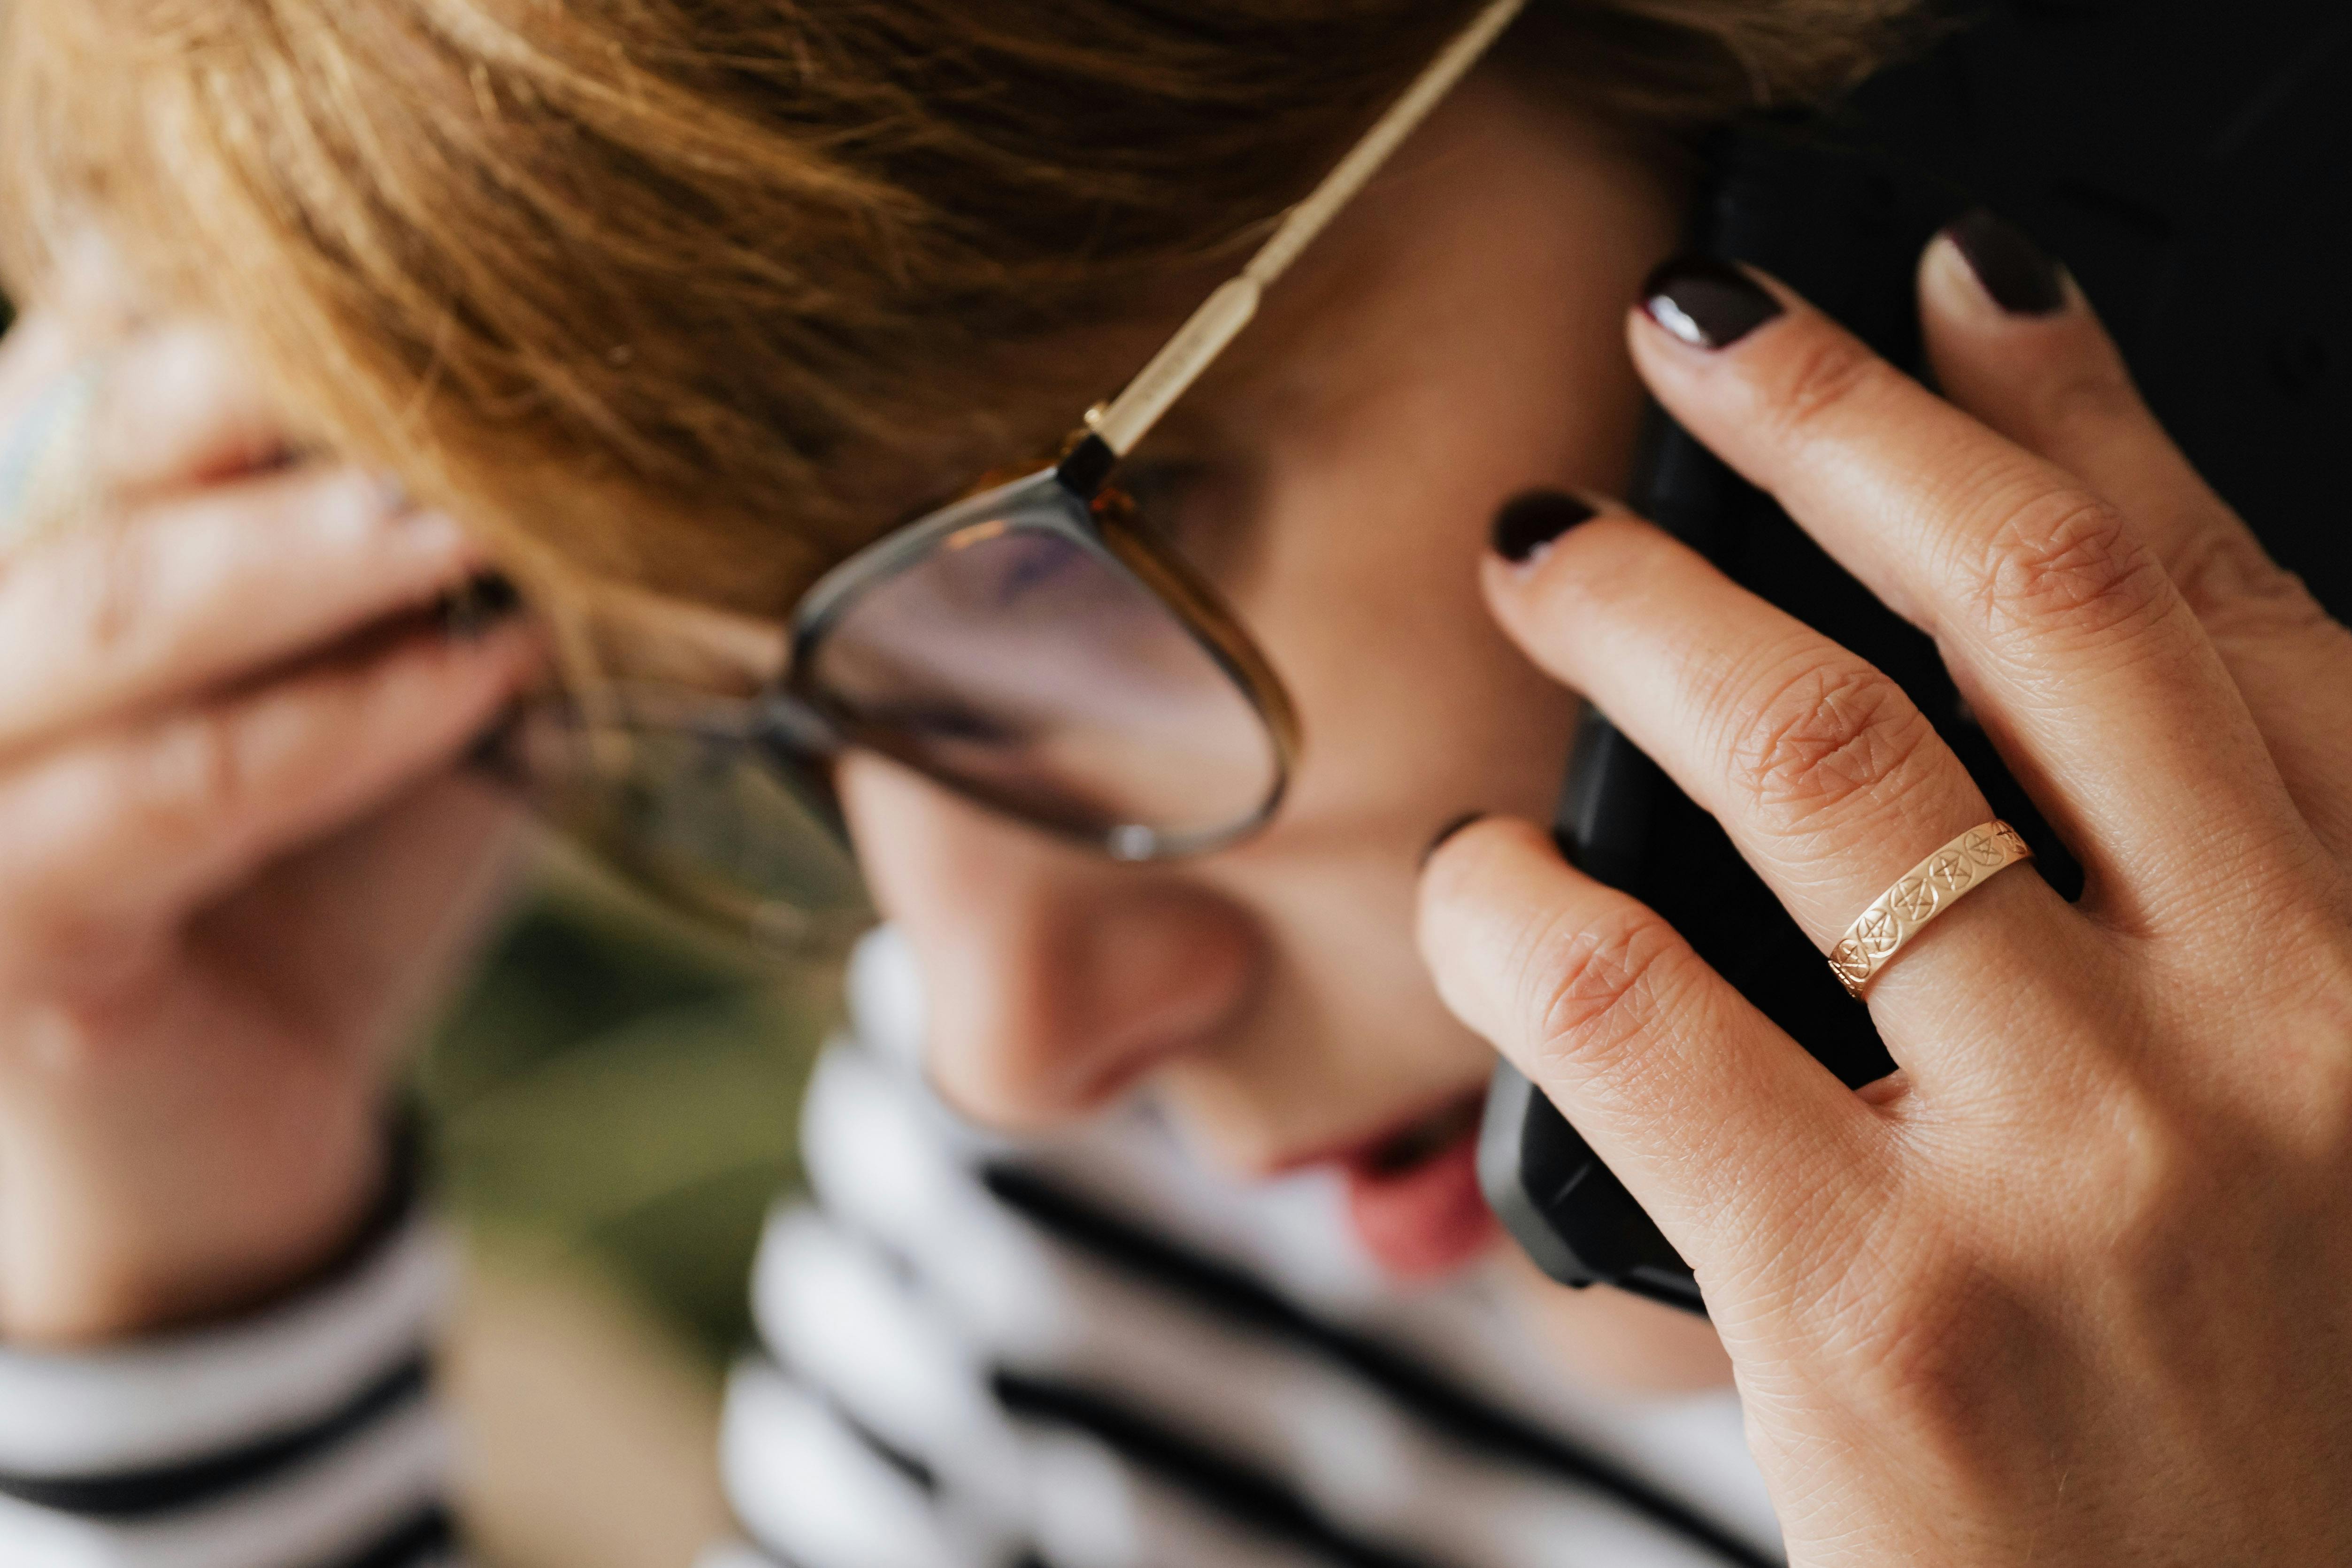 A concerned woman talking on the phone | Source: Pexels